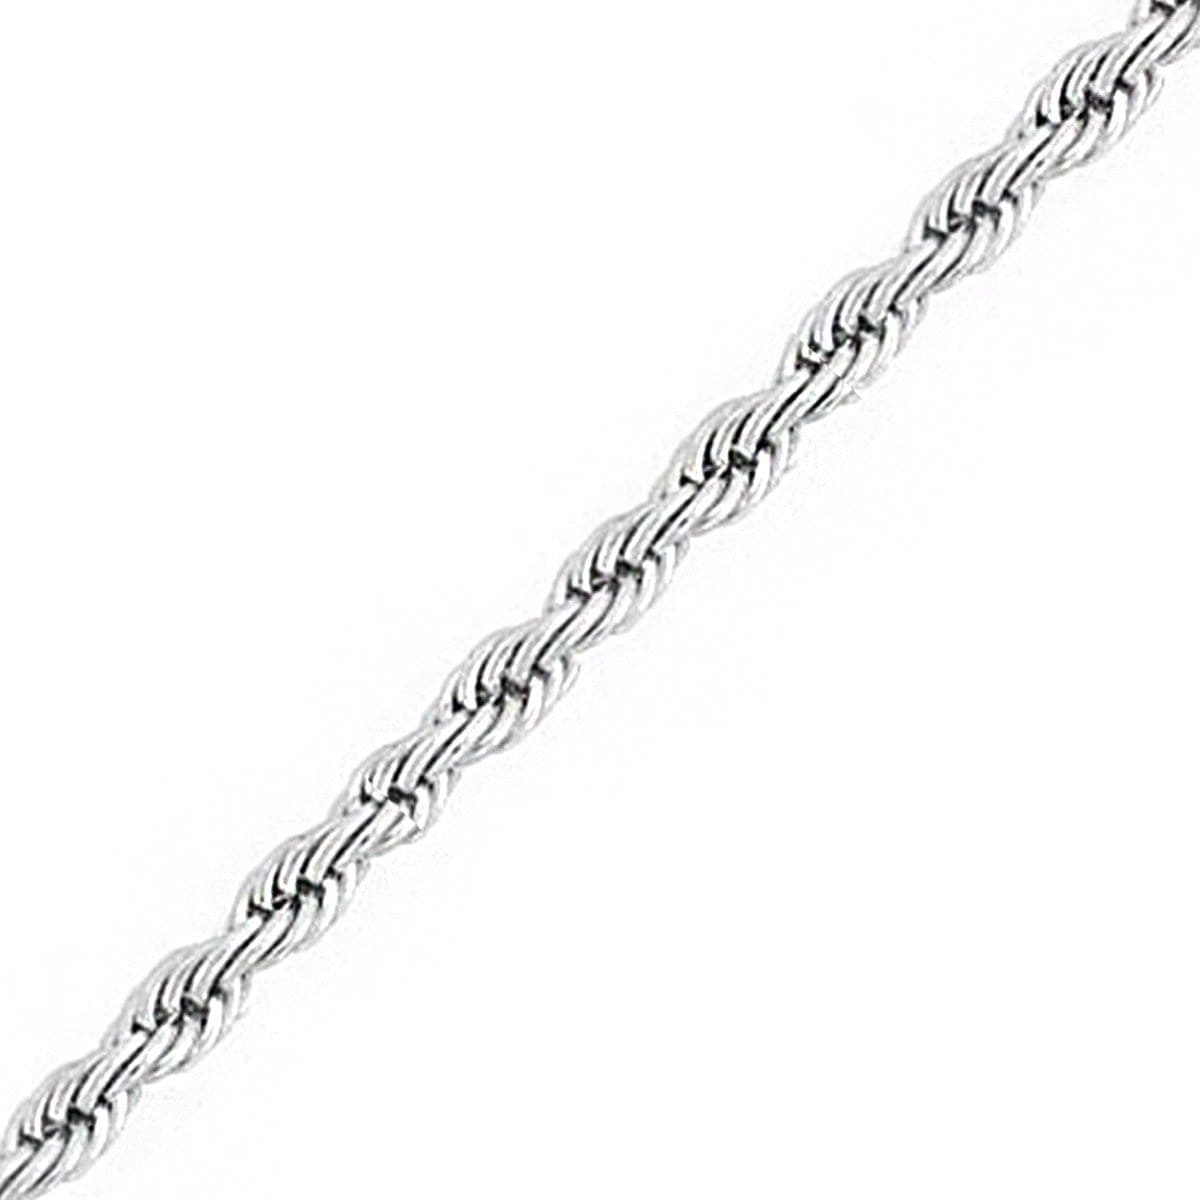 INOX JEWELRY Chains Silver Tone Stainless Steel Polished 2 mm French Rope Chain